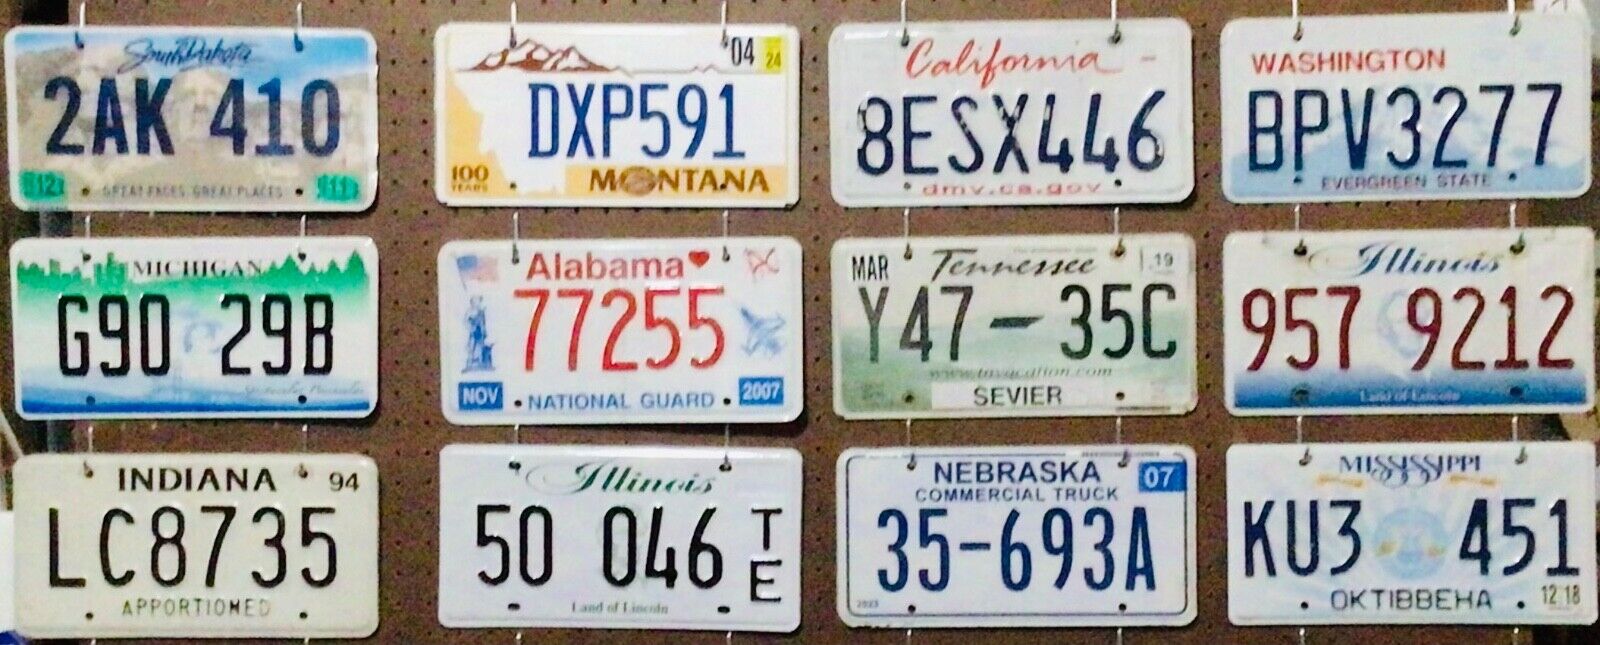 Large lot colorful of 12 old license plates - bulk - many states - low shipping